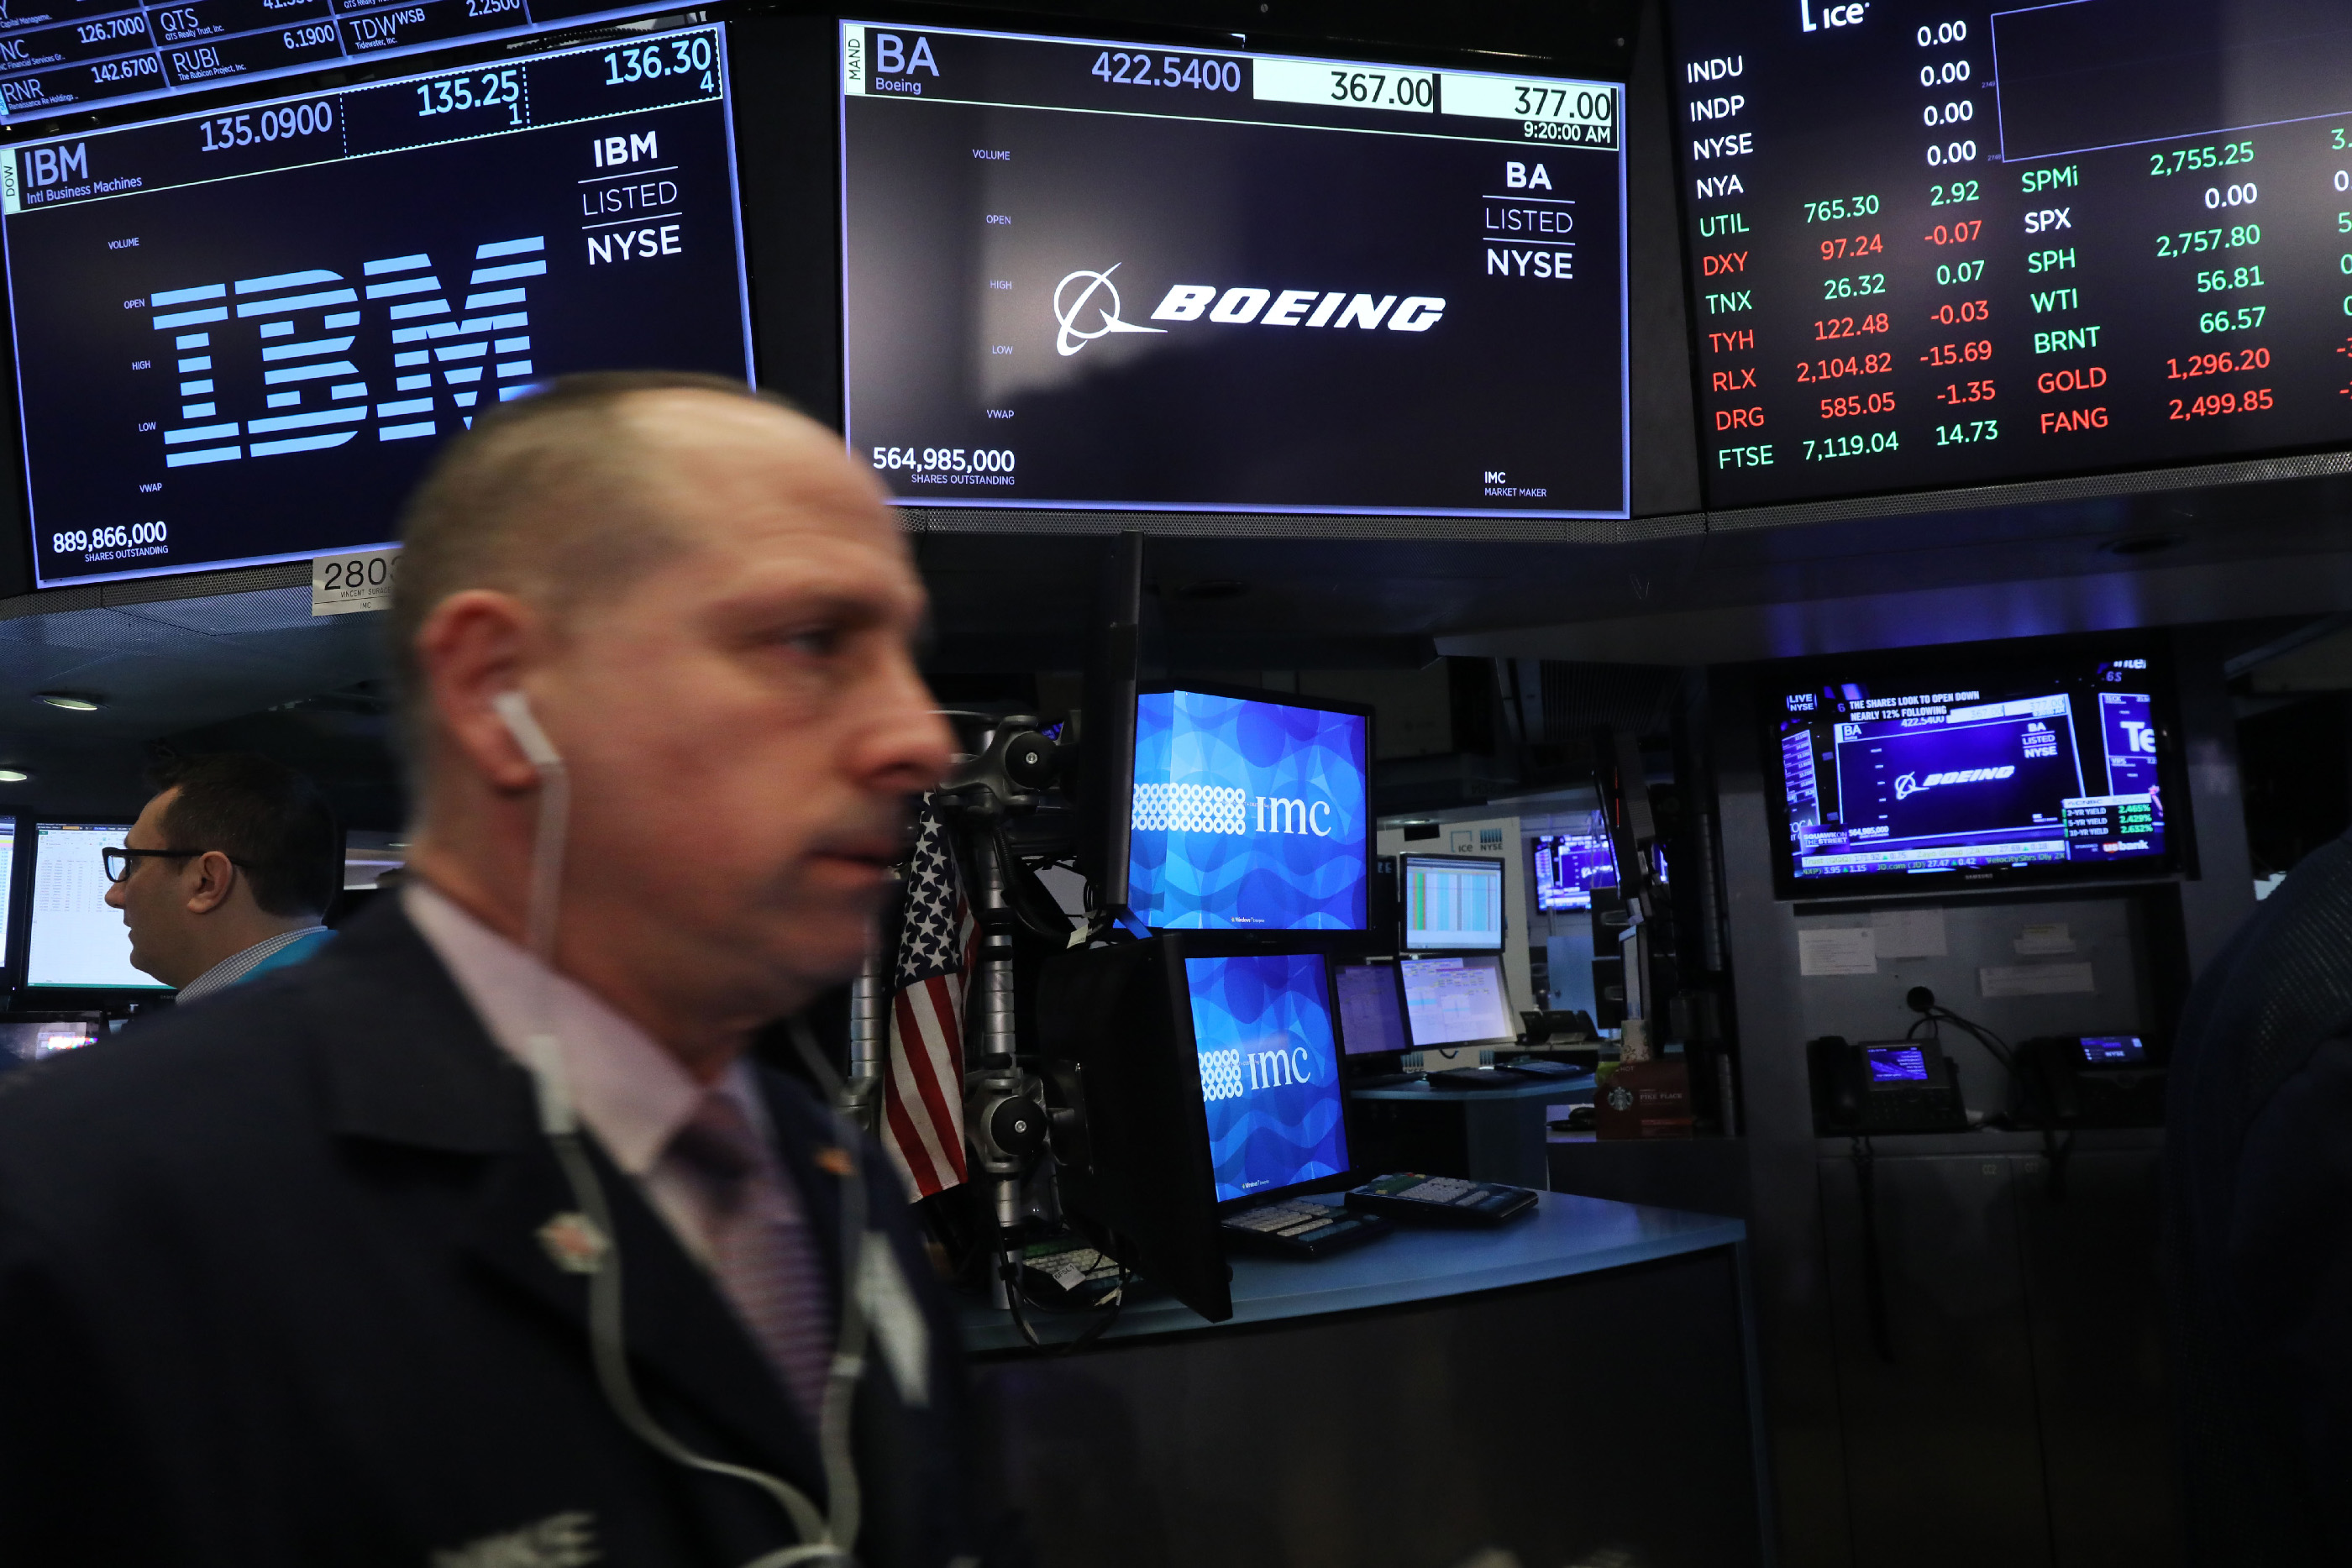 The Dow Is Lagging Behind the Stock Market This Week. Here's the Strange Reason Why